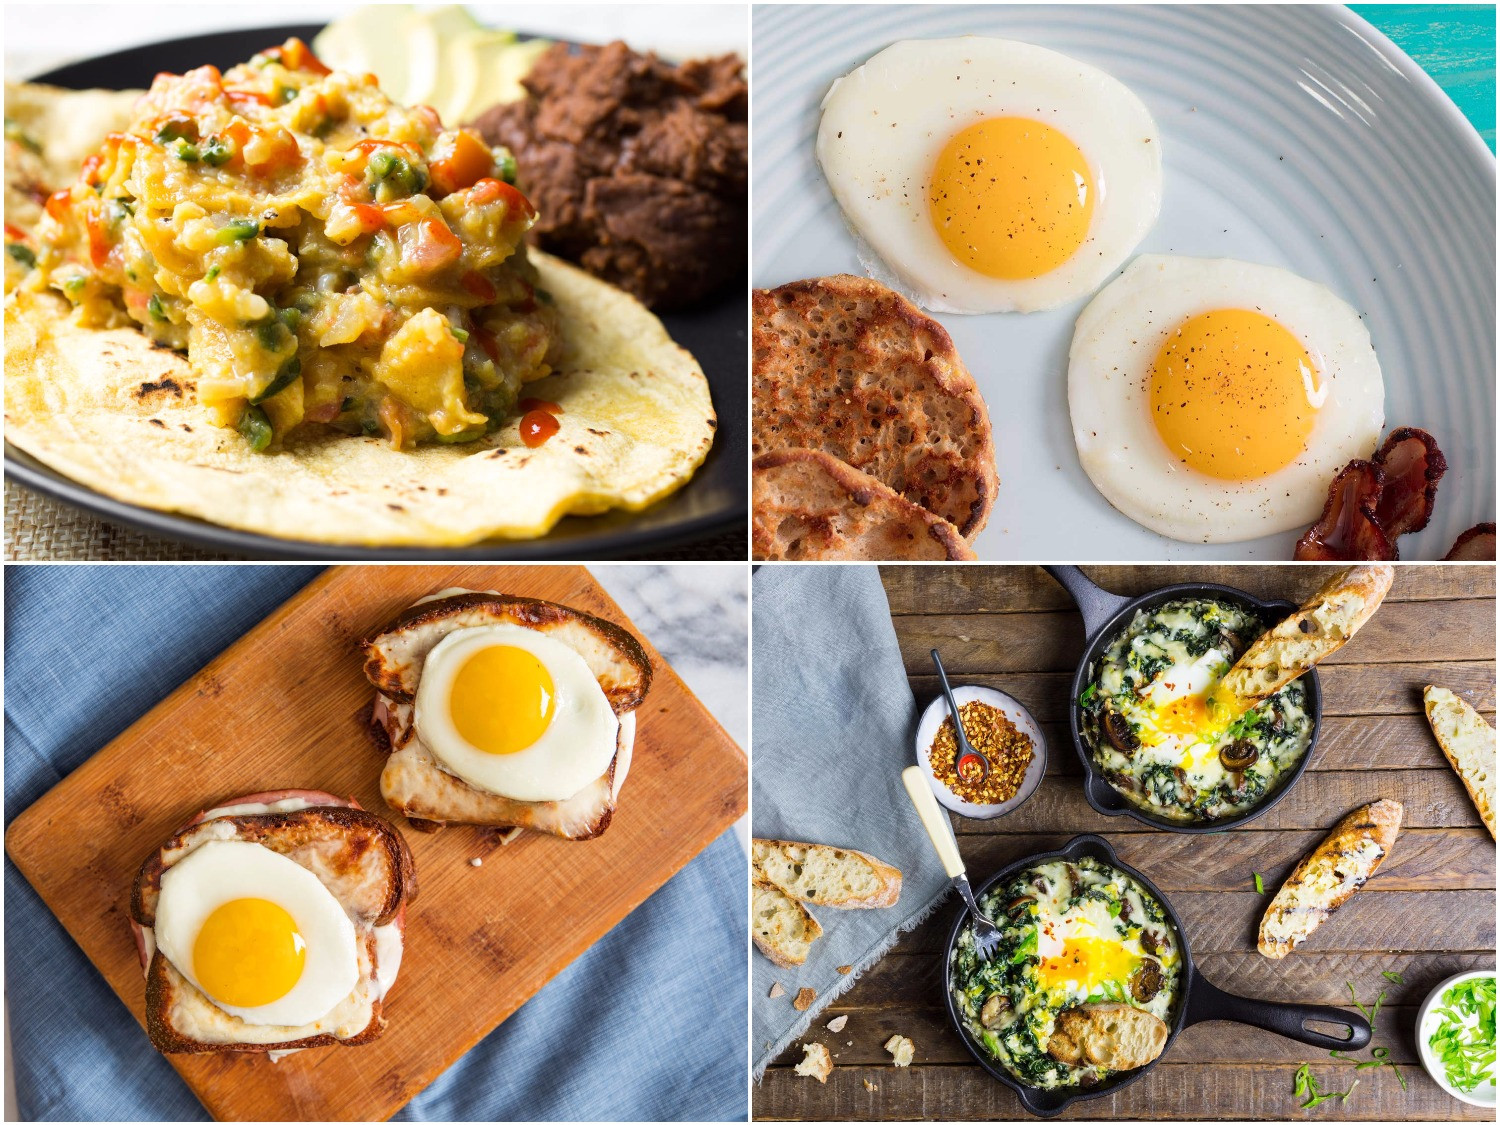 Breakfast Meals With Eggs 24 Egg Breakfast Recipes to Start Your Day